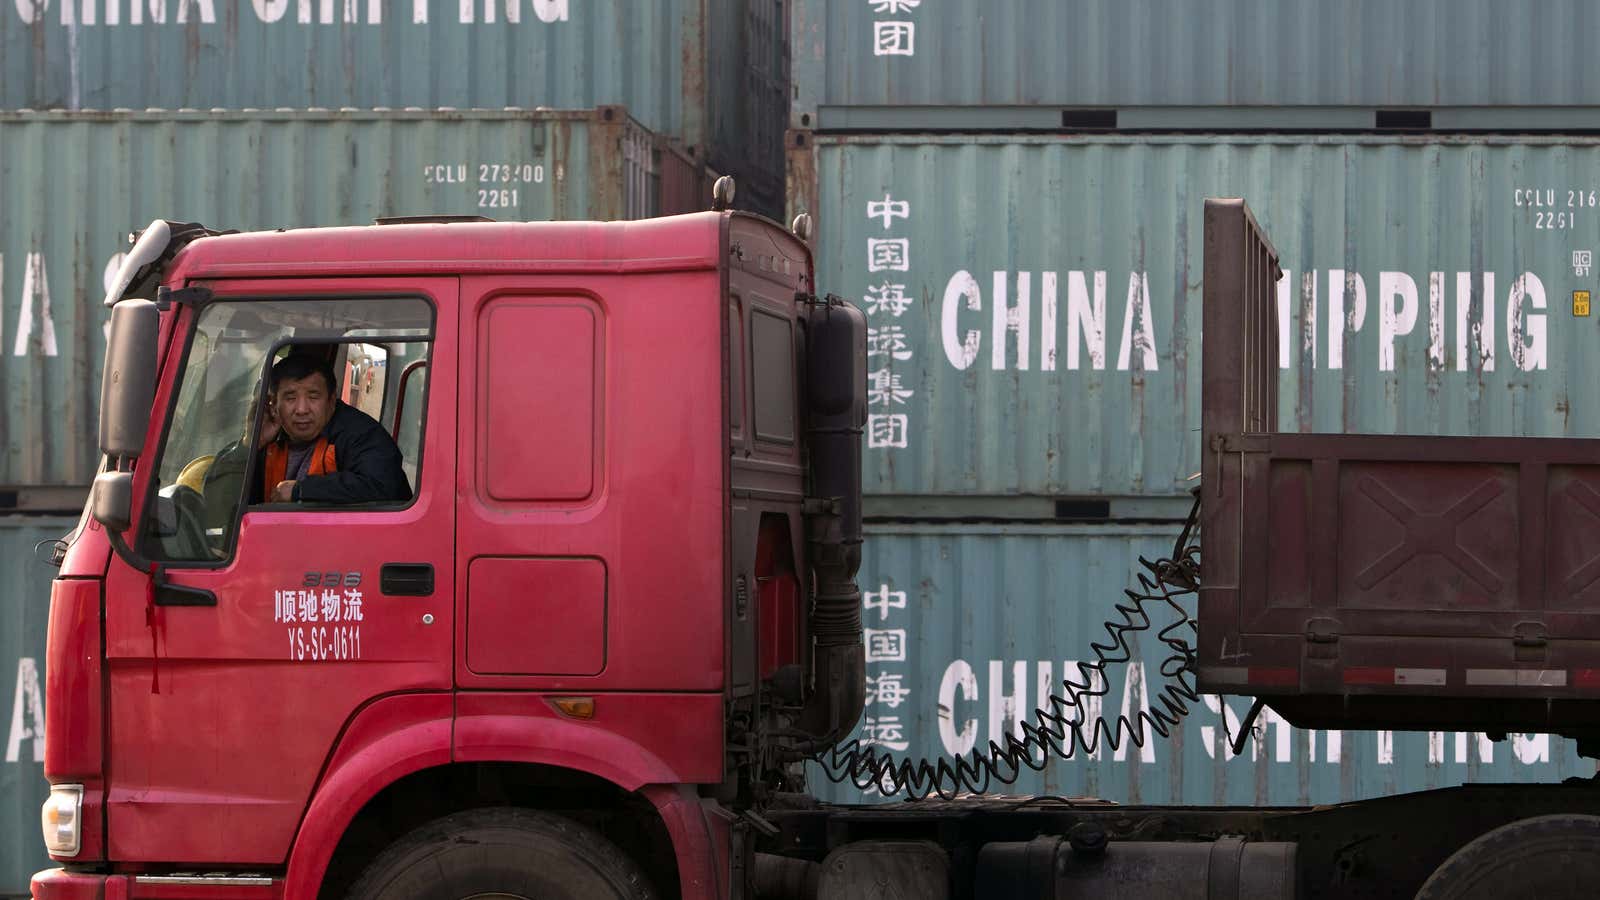 Each month, tens of billions are entering China as exports that never existed.